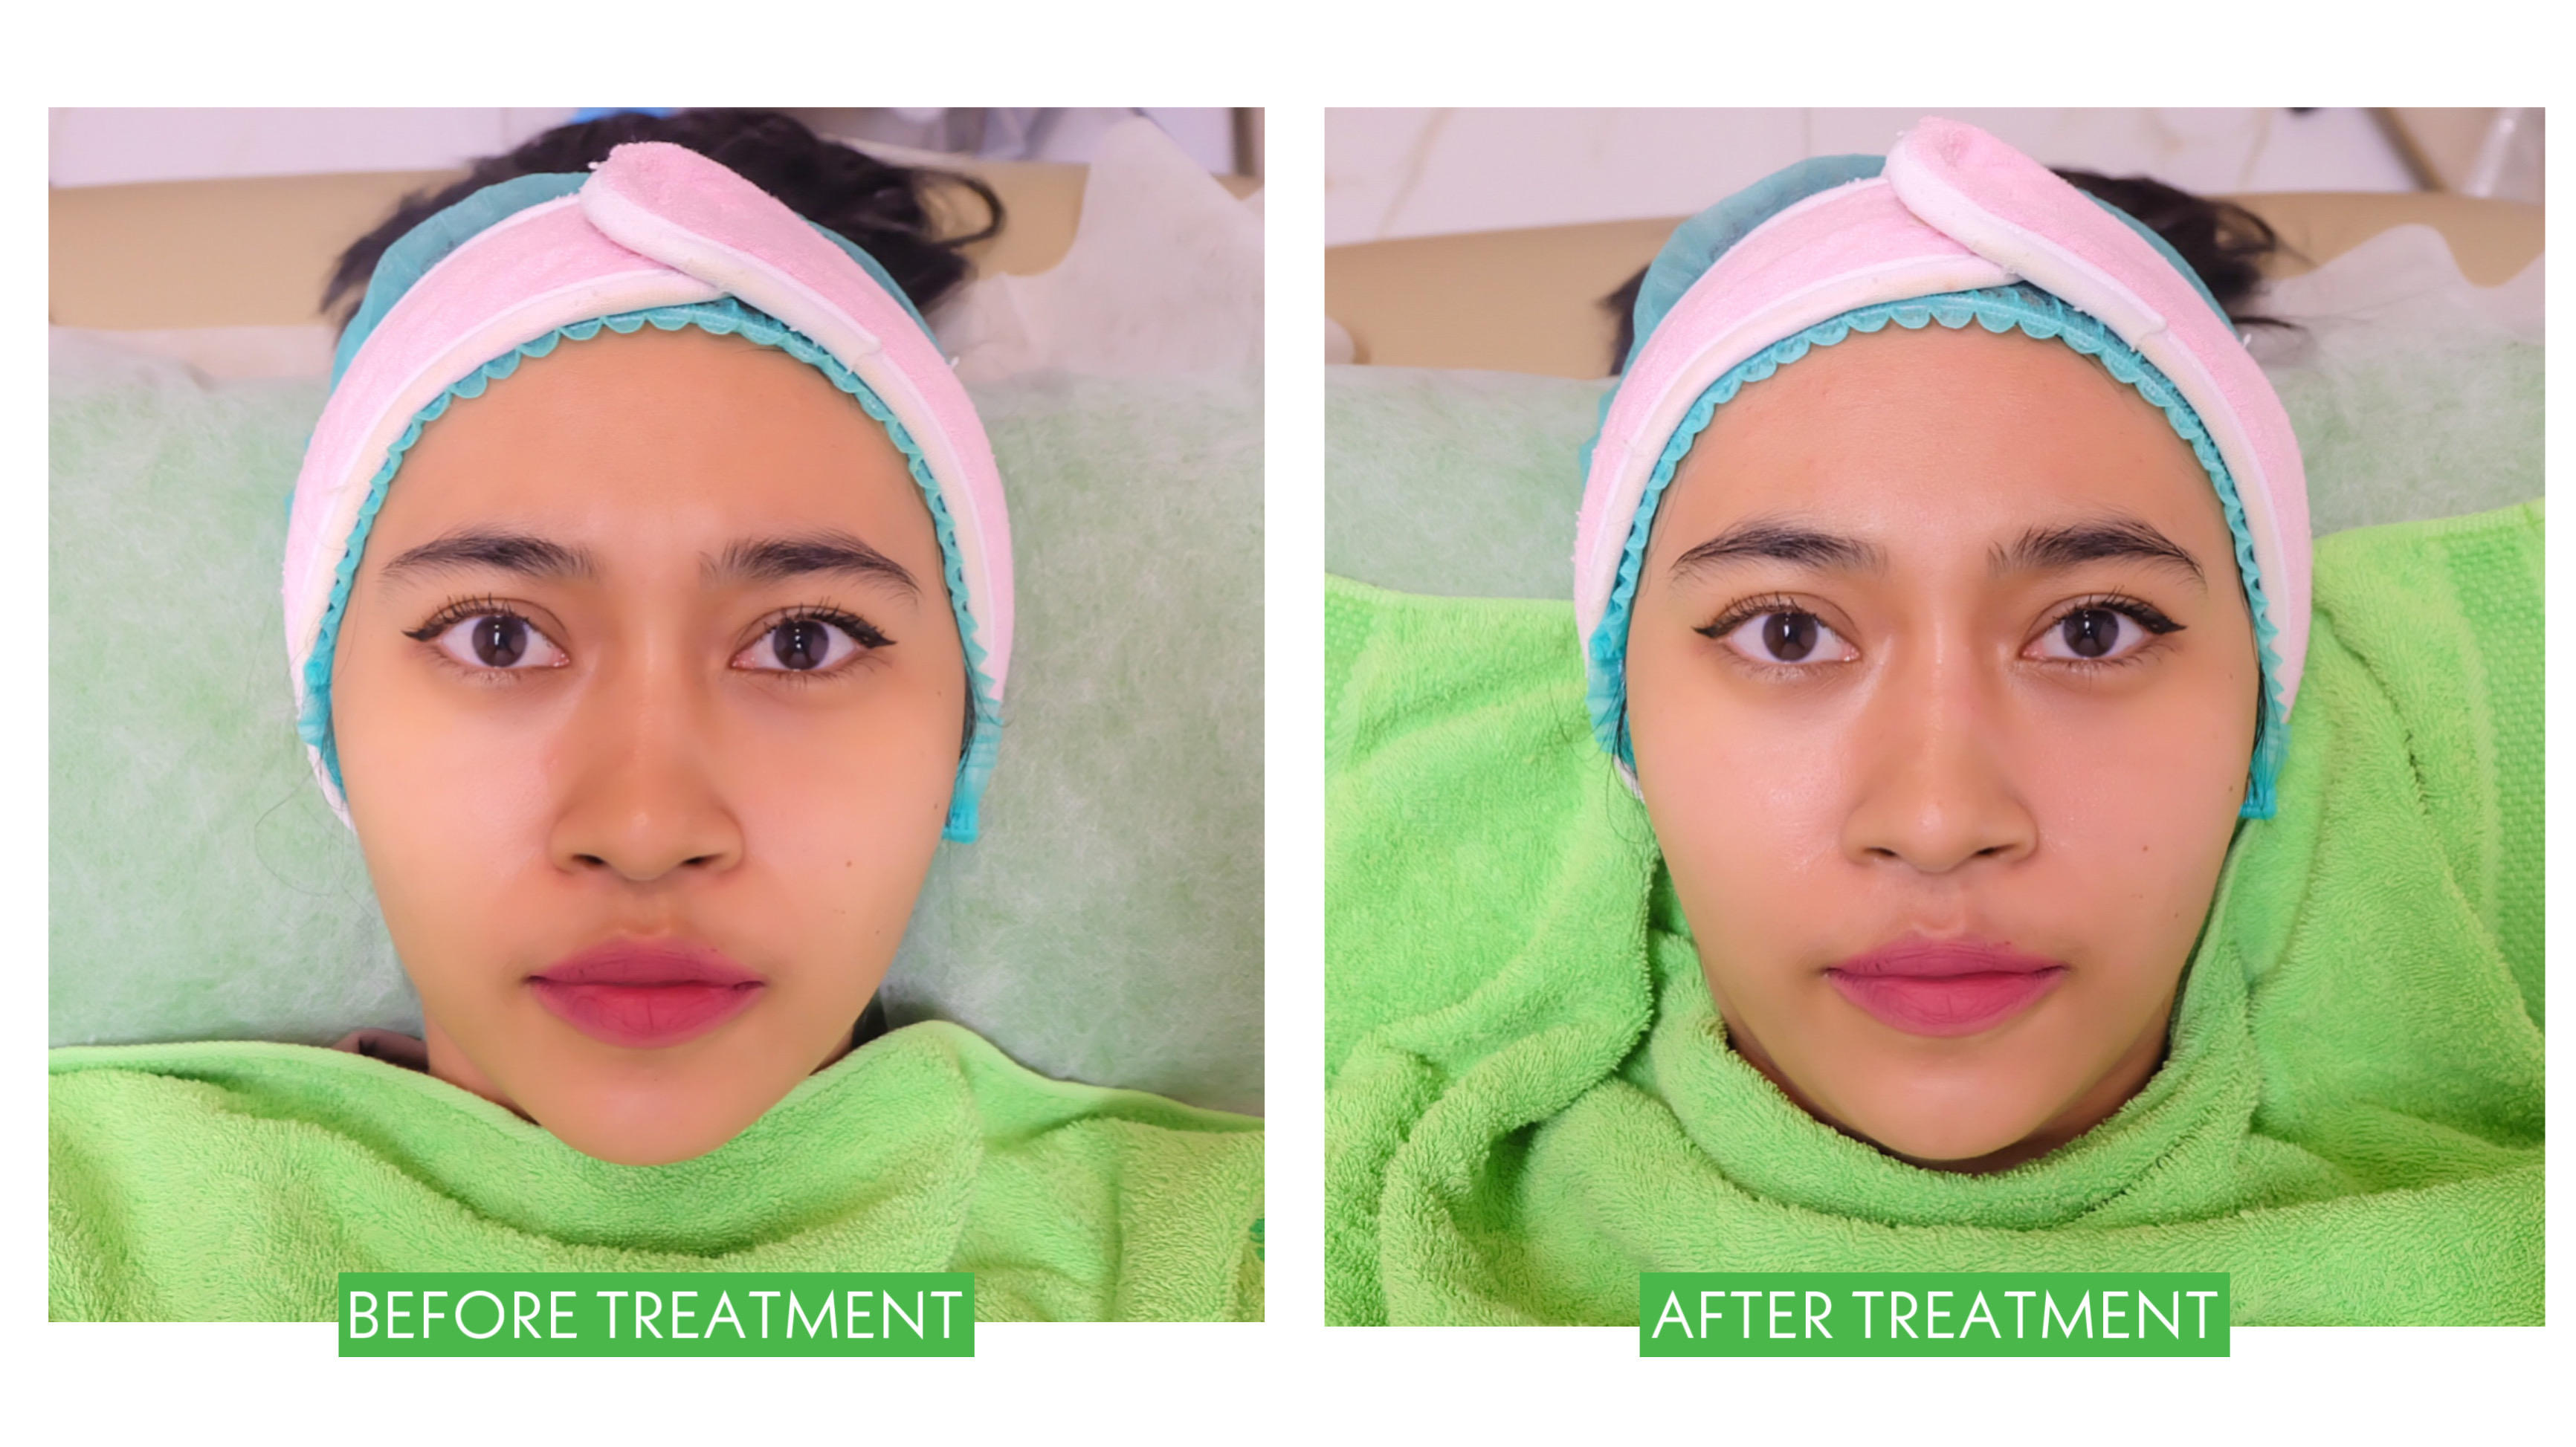 [Review] Treatment DNA Salmon Micro Injection di ZAP Clinic